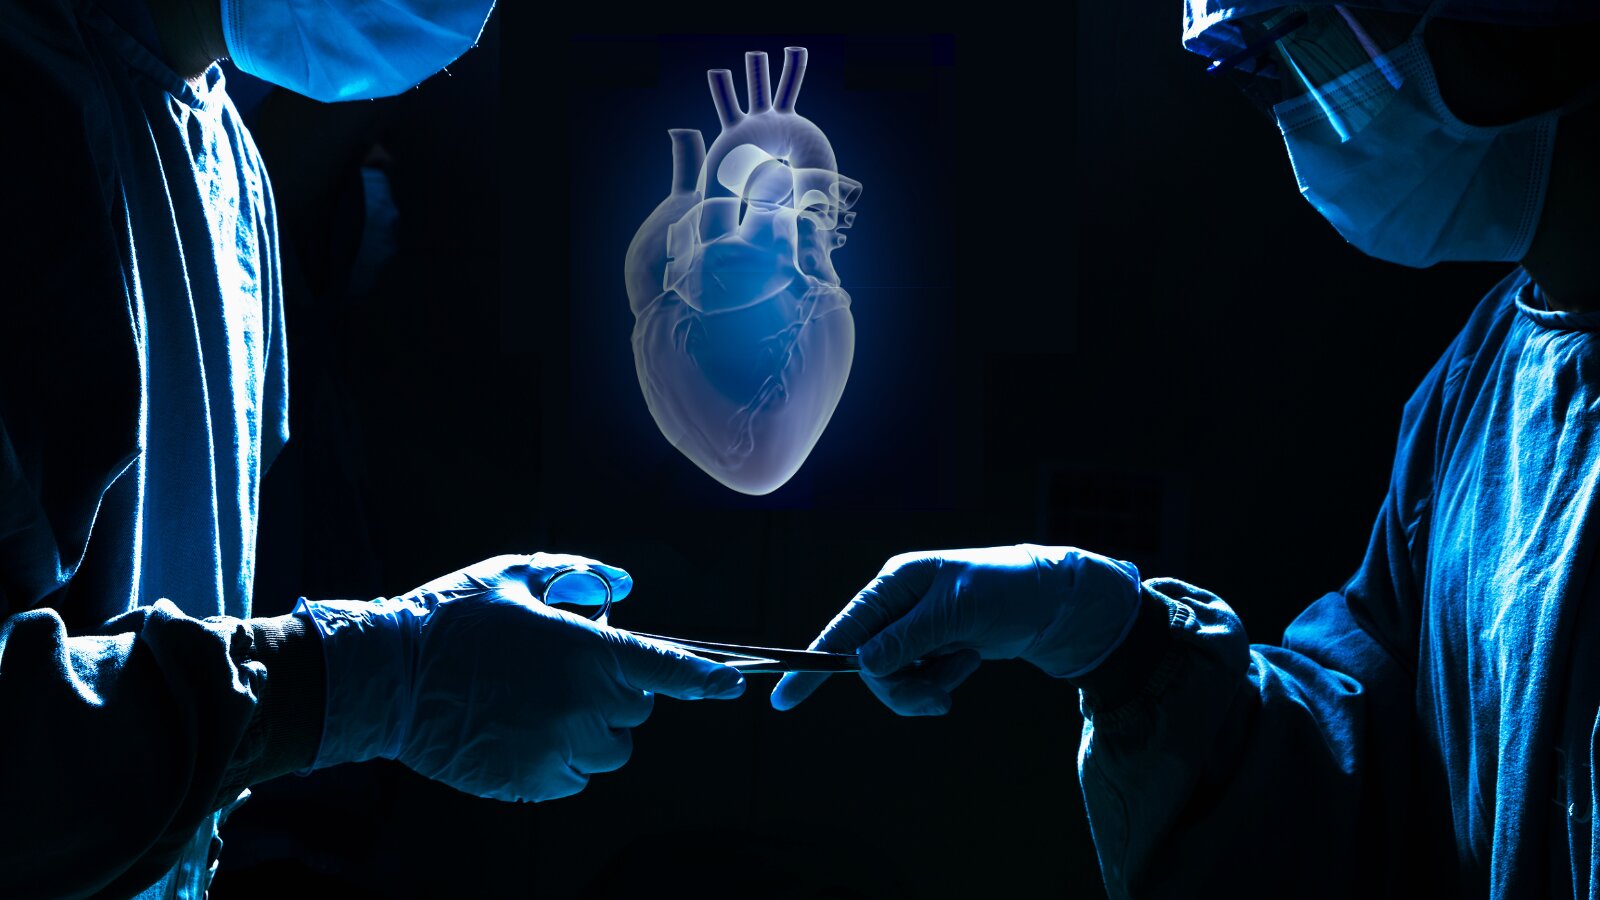 Developing 3D live hologram technology to save lives in field hospitals